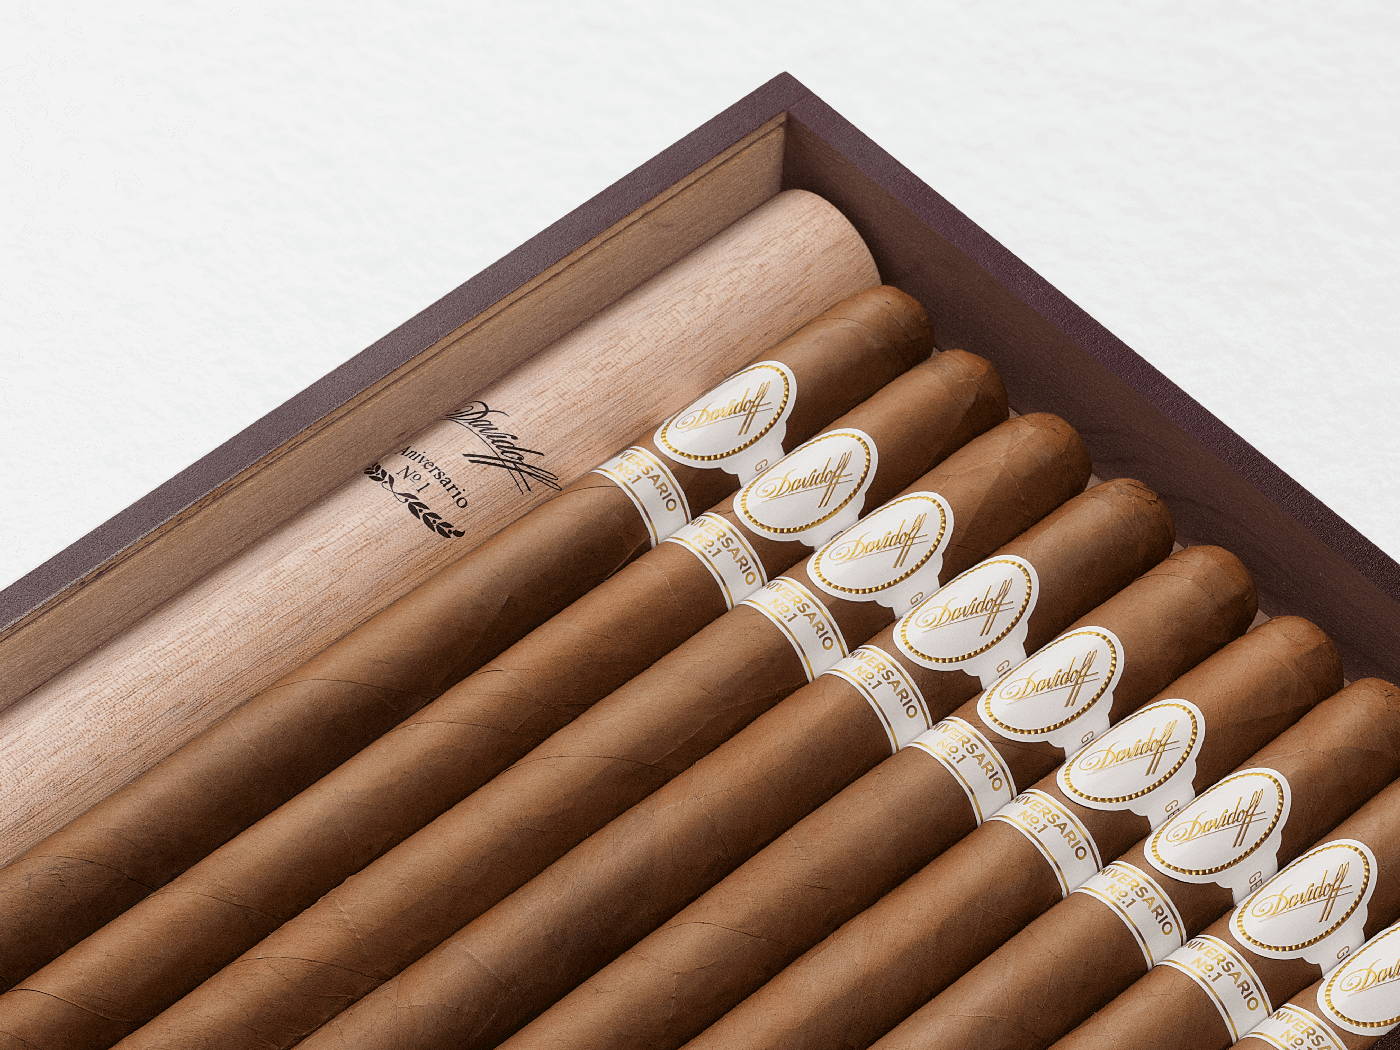 Opened box of the Davidoff Aniversario No. 1 Limited Edition Collection with 10 cigars including 1 wooden tubo inside. 